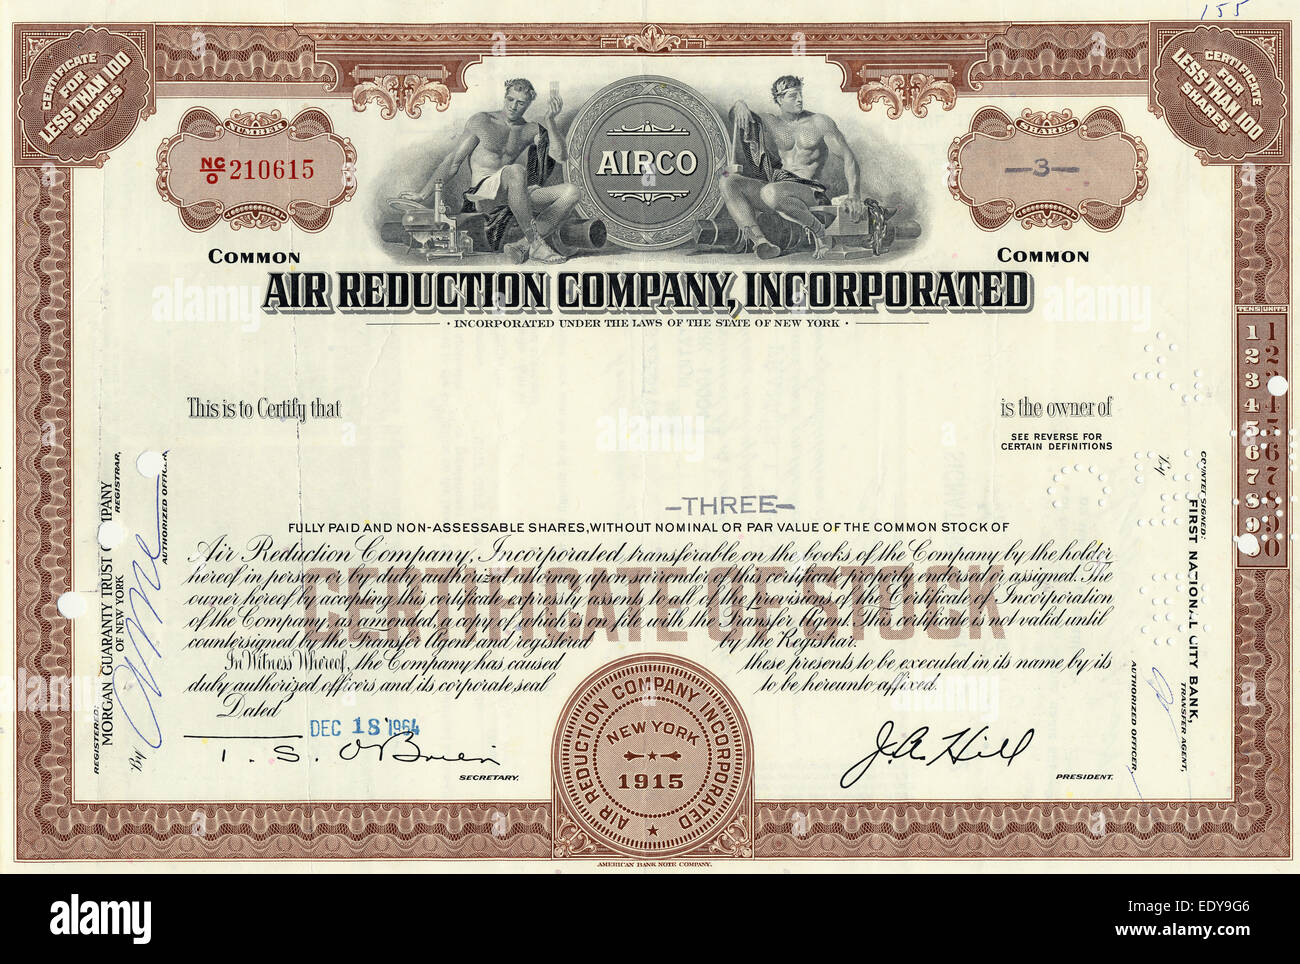 Historic share certificate, Air Reduction Company, 1964 New York, USA Stock Photo